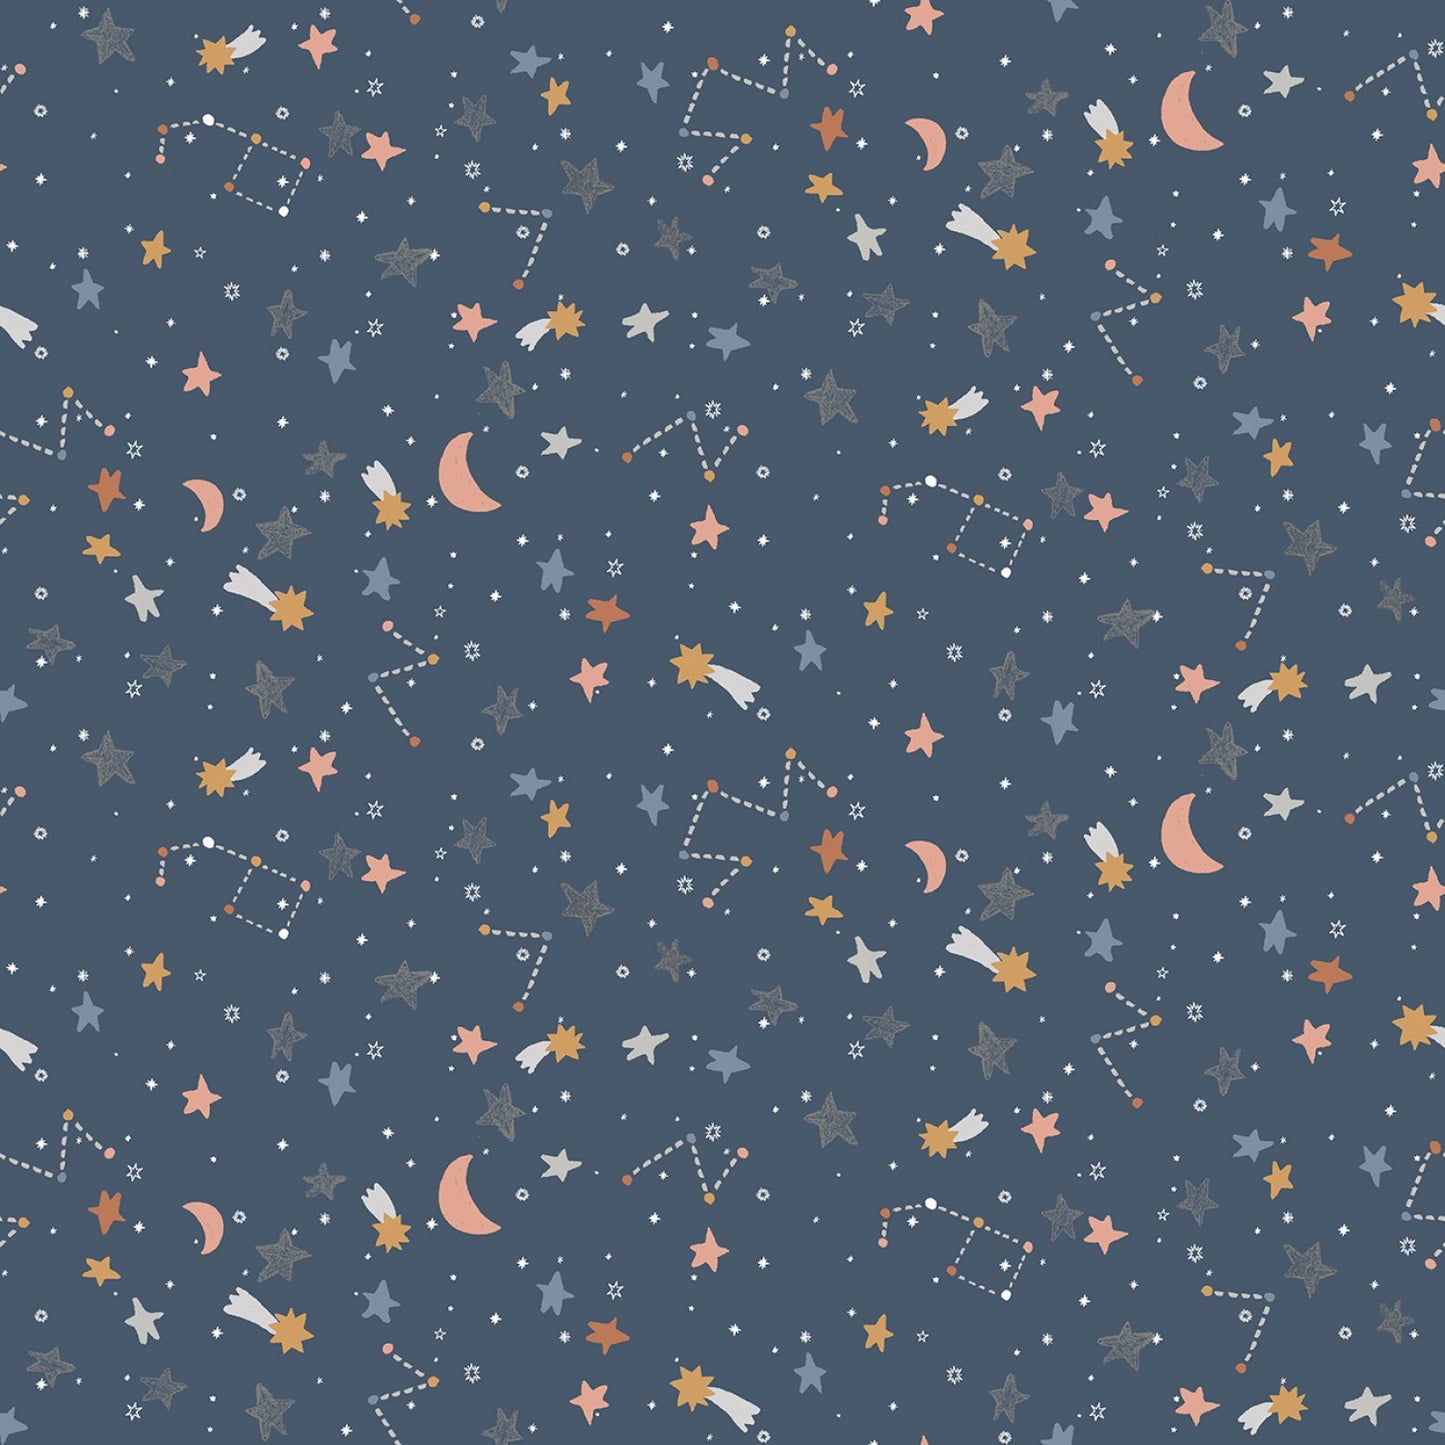 Out Of This World - Orion - Cotton Fabric